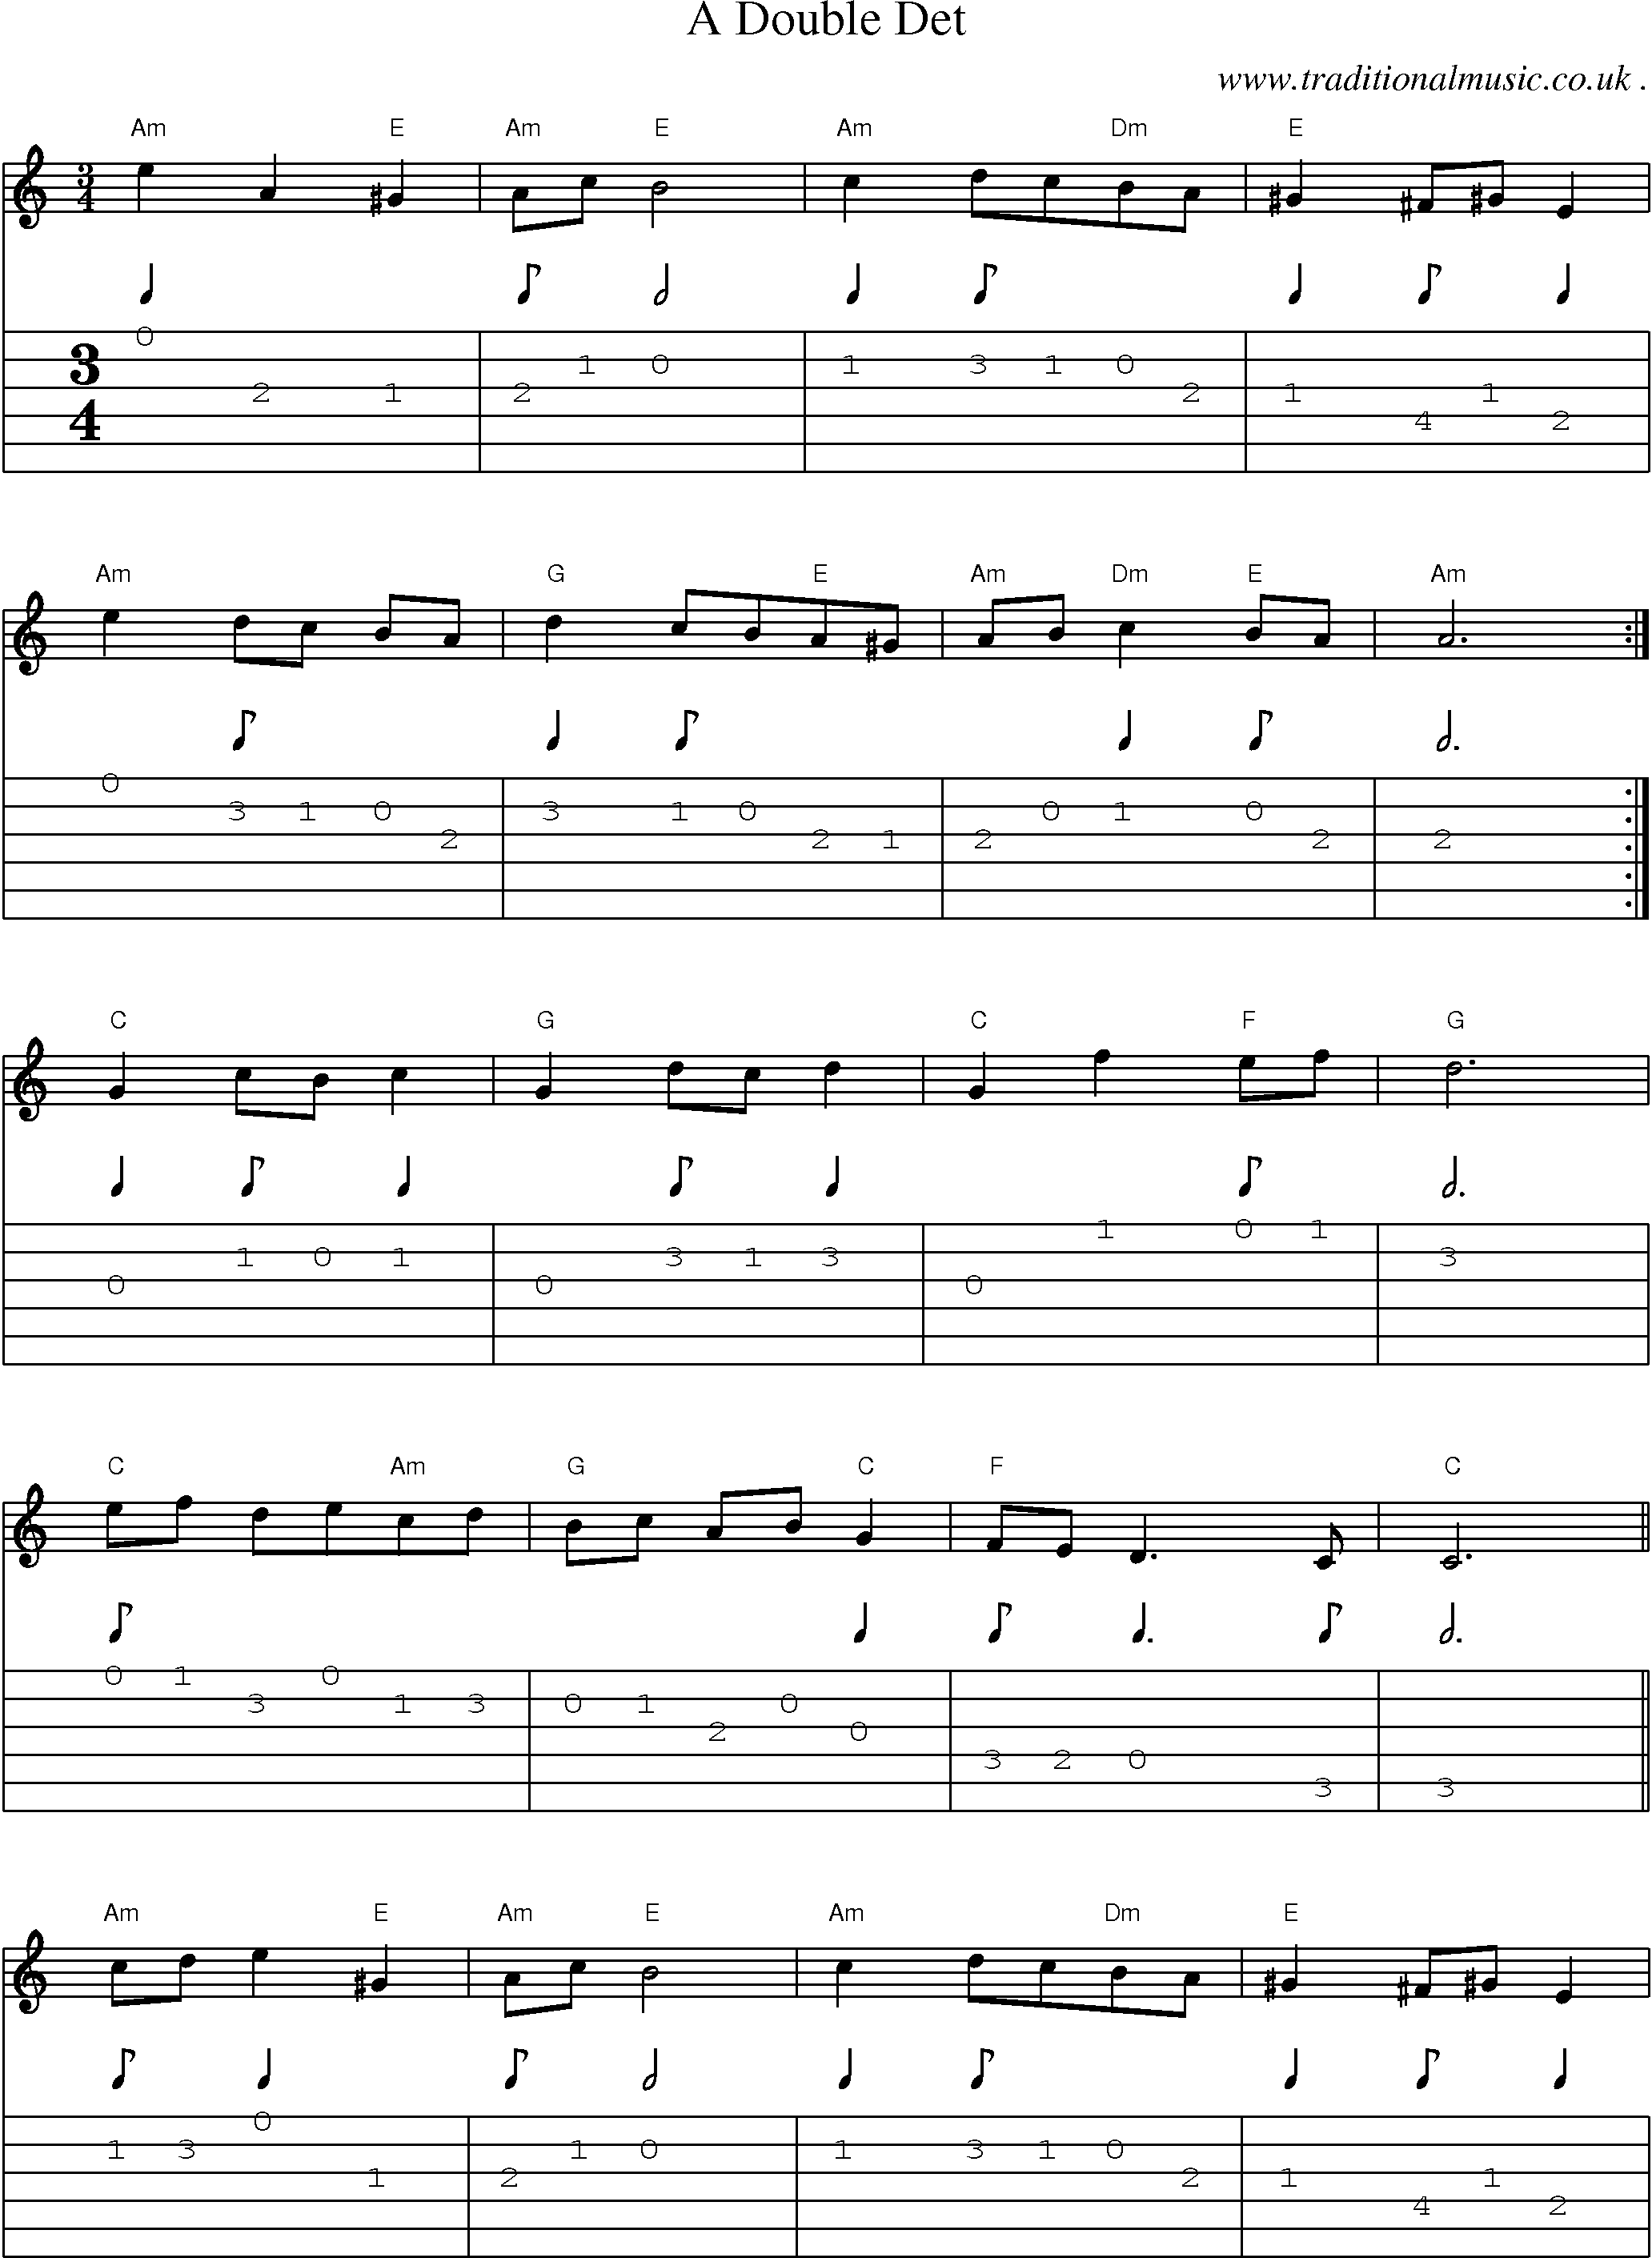 Sheet-Music and Guitar Tabs for A Double Det